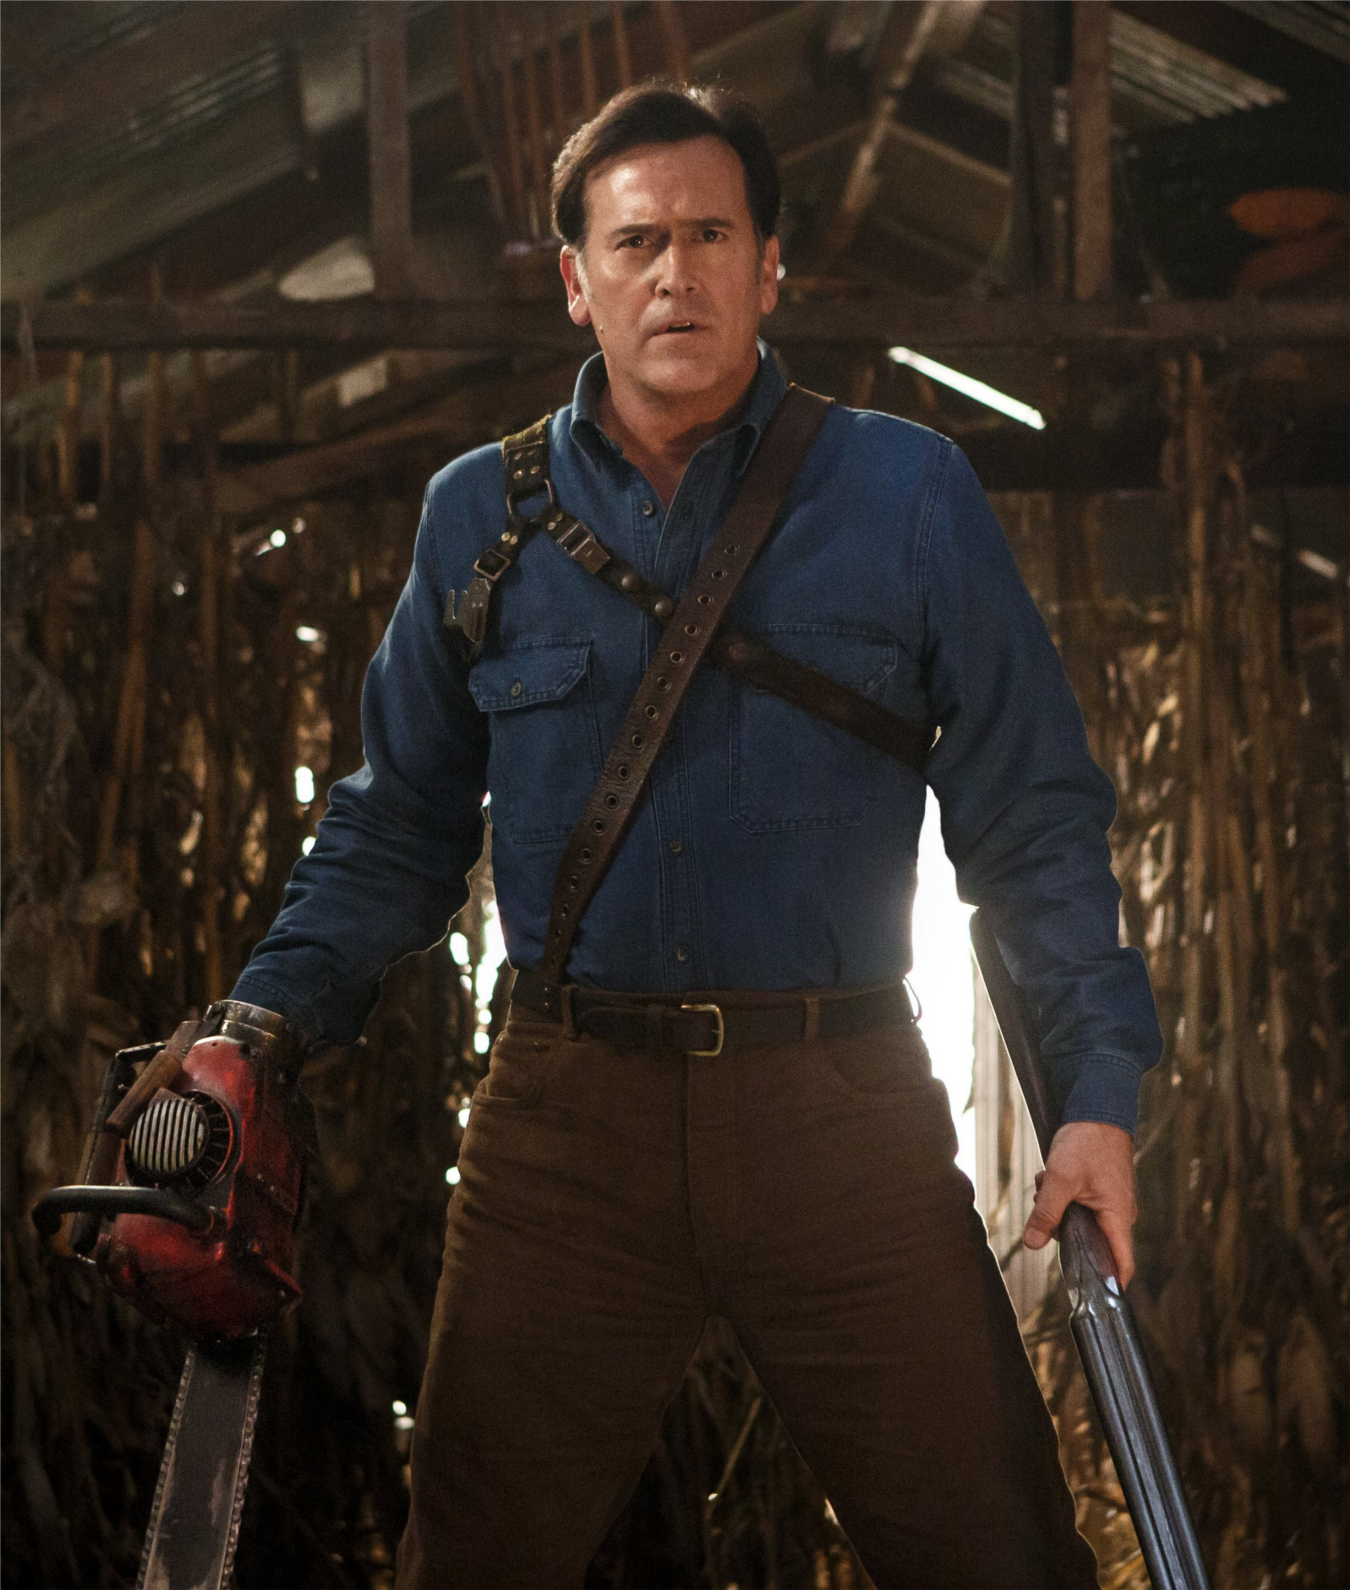 EVIL DEAD: THE GAME Puts The Boomstick In Your Hands